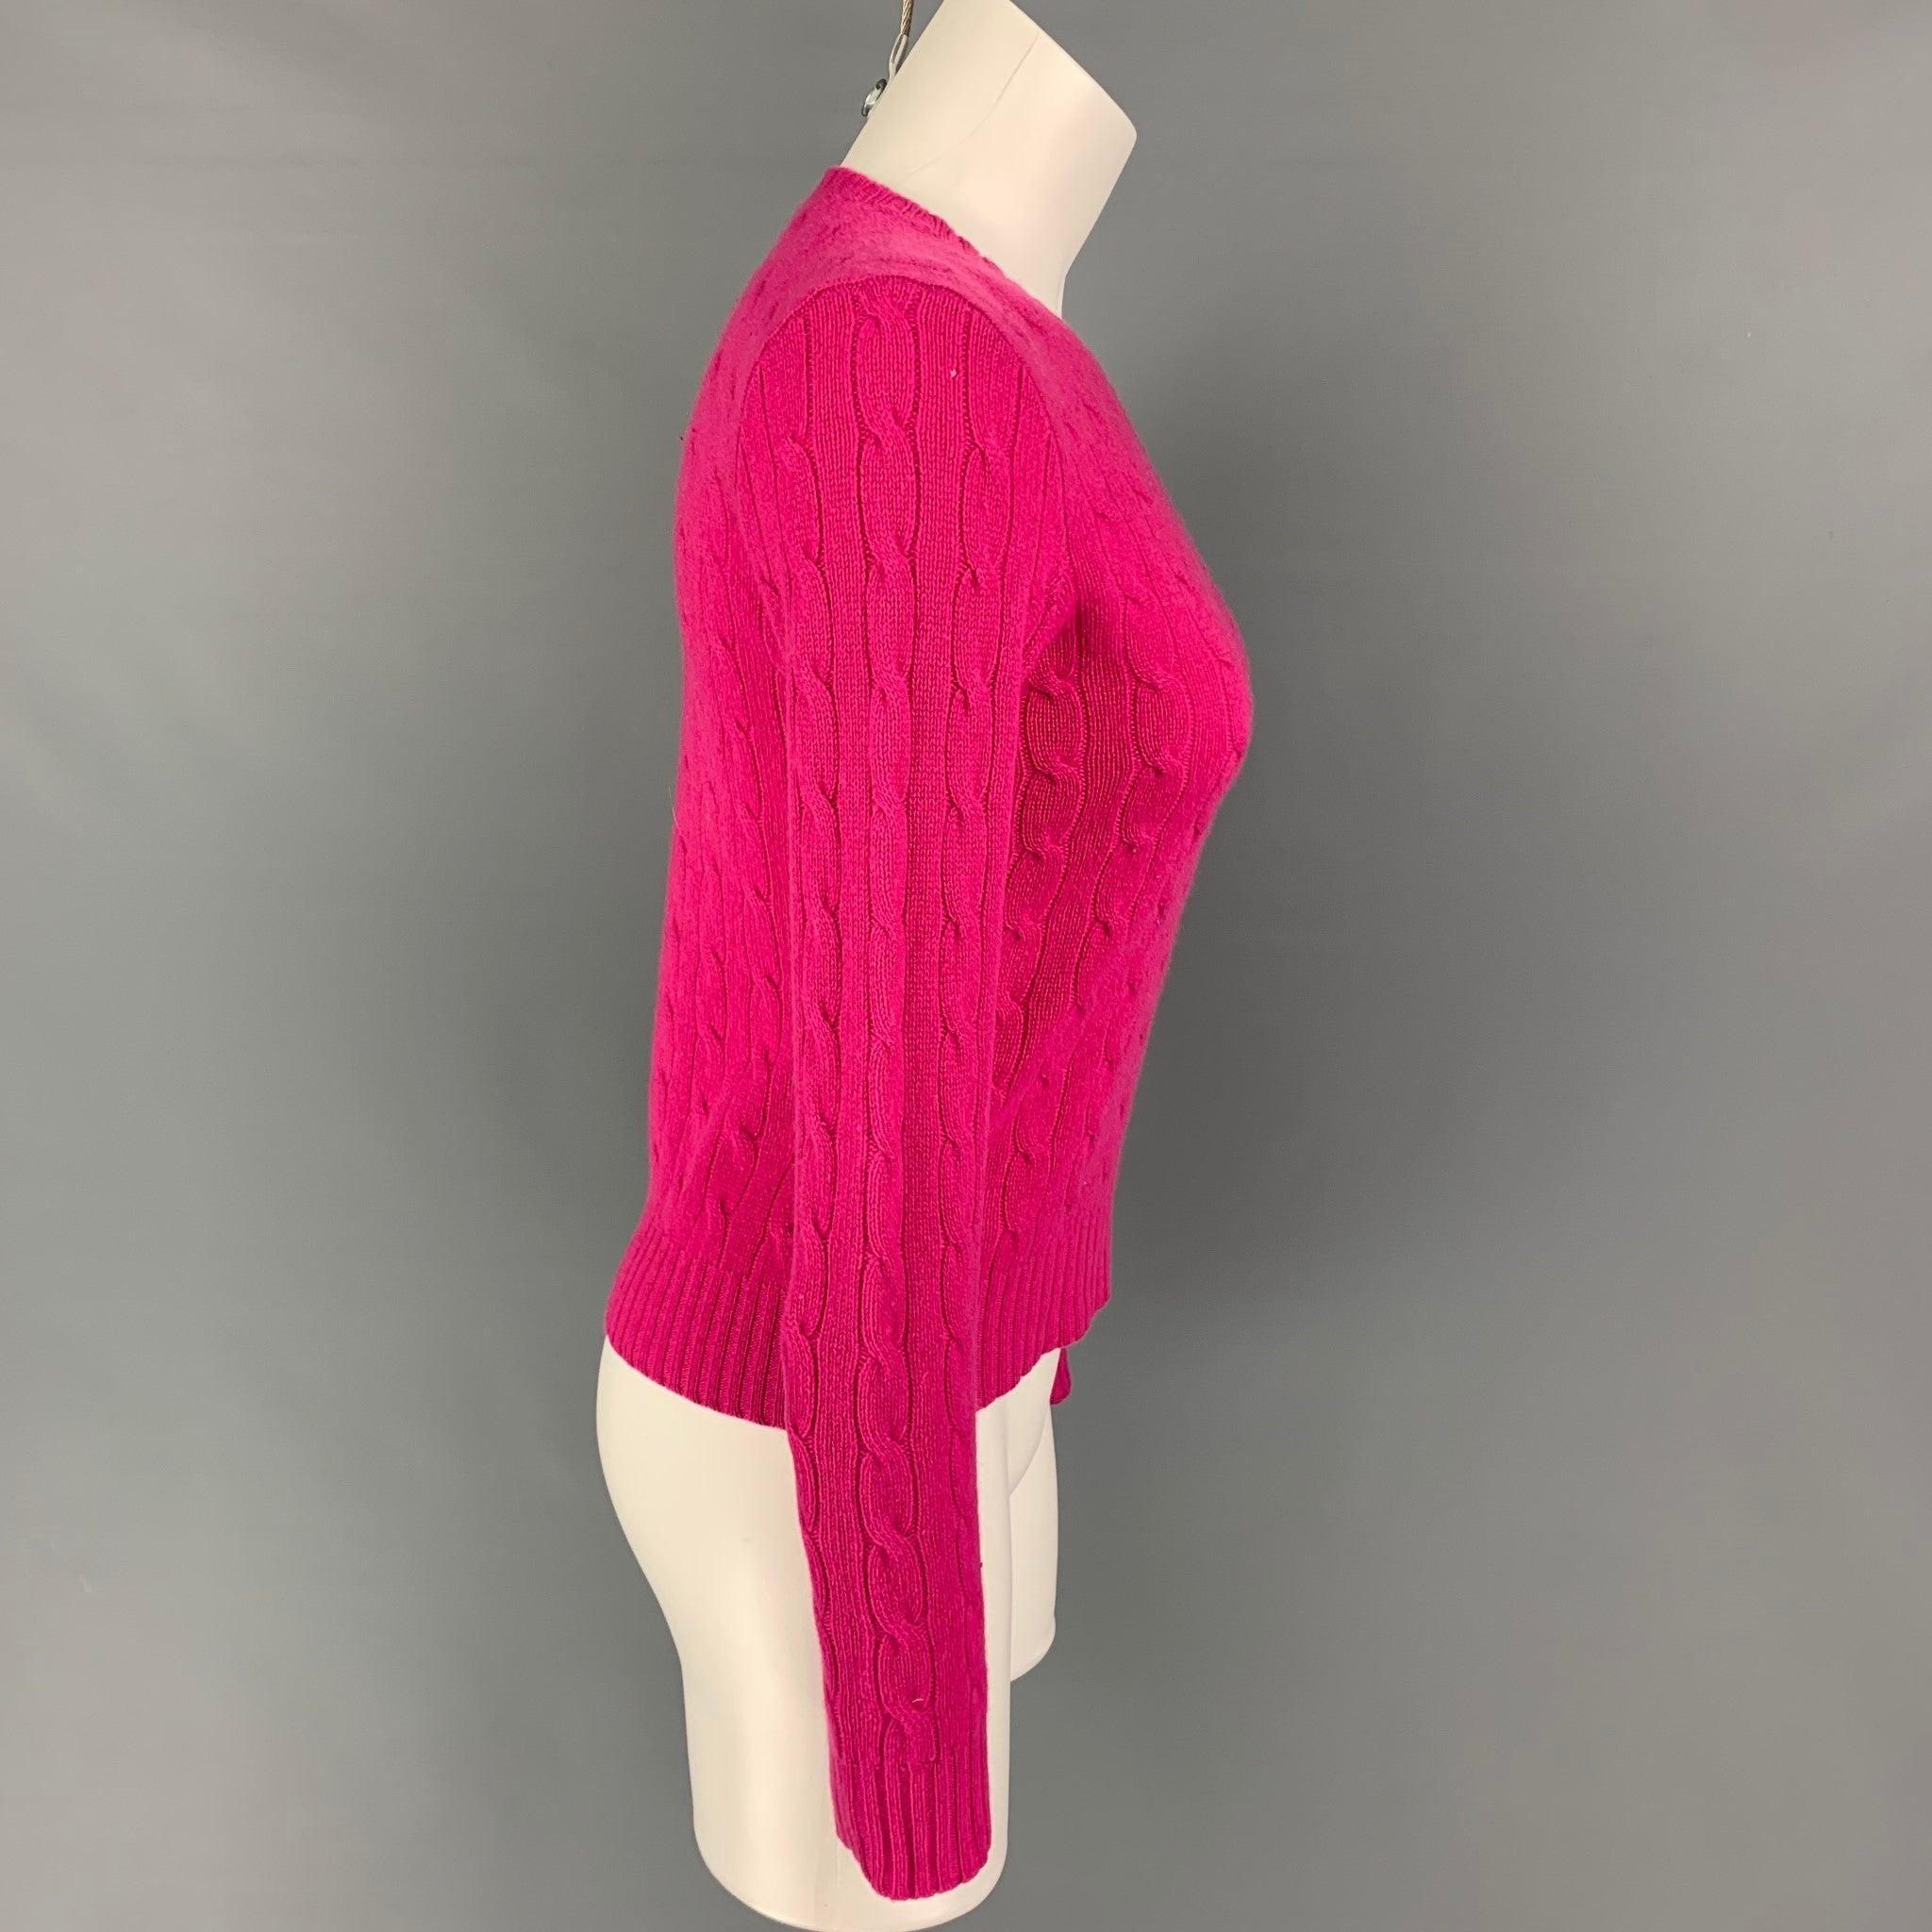 RALPH LAUREN 'Black Label' sweater comes in a raspberry cashmere featuring a crew-neck.
Very Good Pre-Owned Condition. Logo tag removed.  

Marked:   Size tag removed.  

Measurements: 
 
Shoulder: 16.5 inches  Bust:
33 inches  Sleeve: 26 inches 